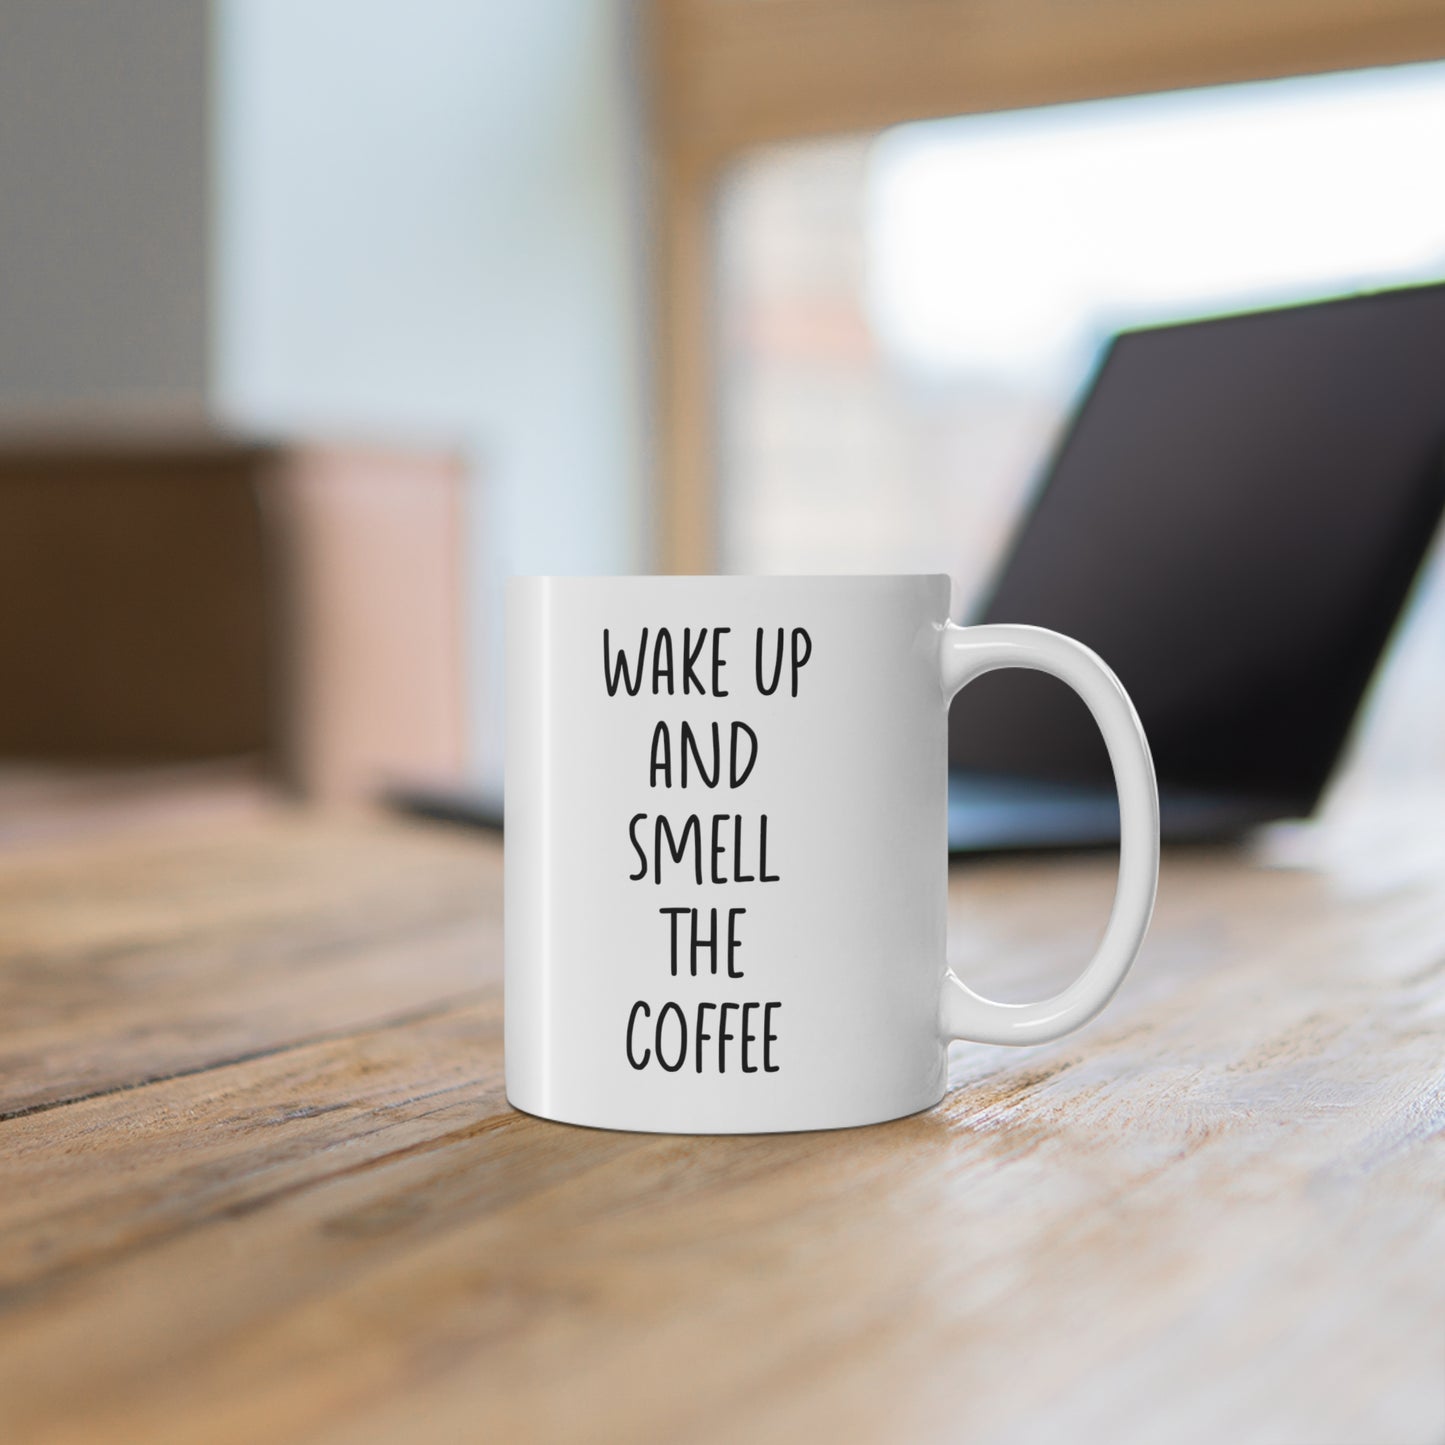 11oz ceramic mug with quote Wake Up and Smell the Coffee